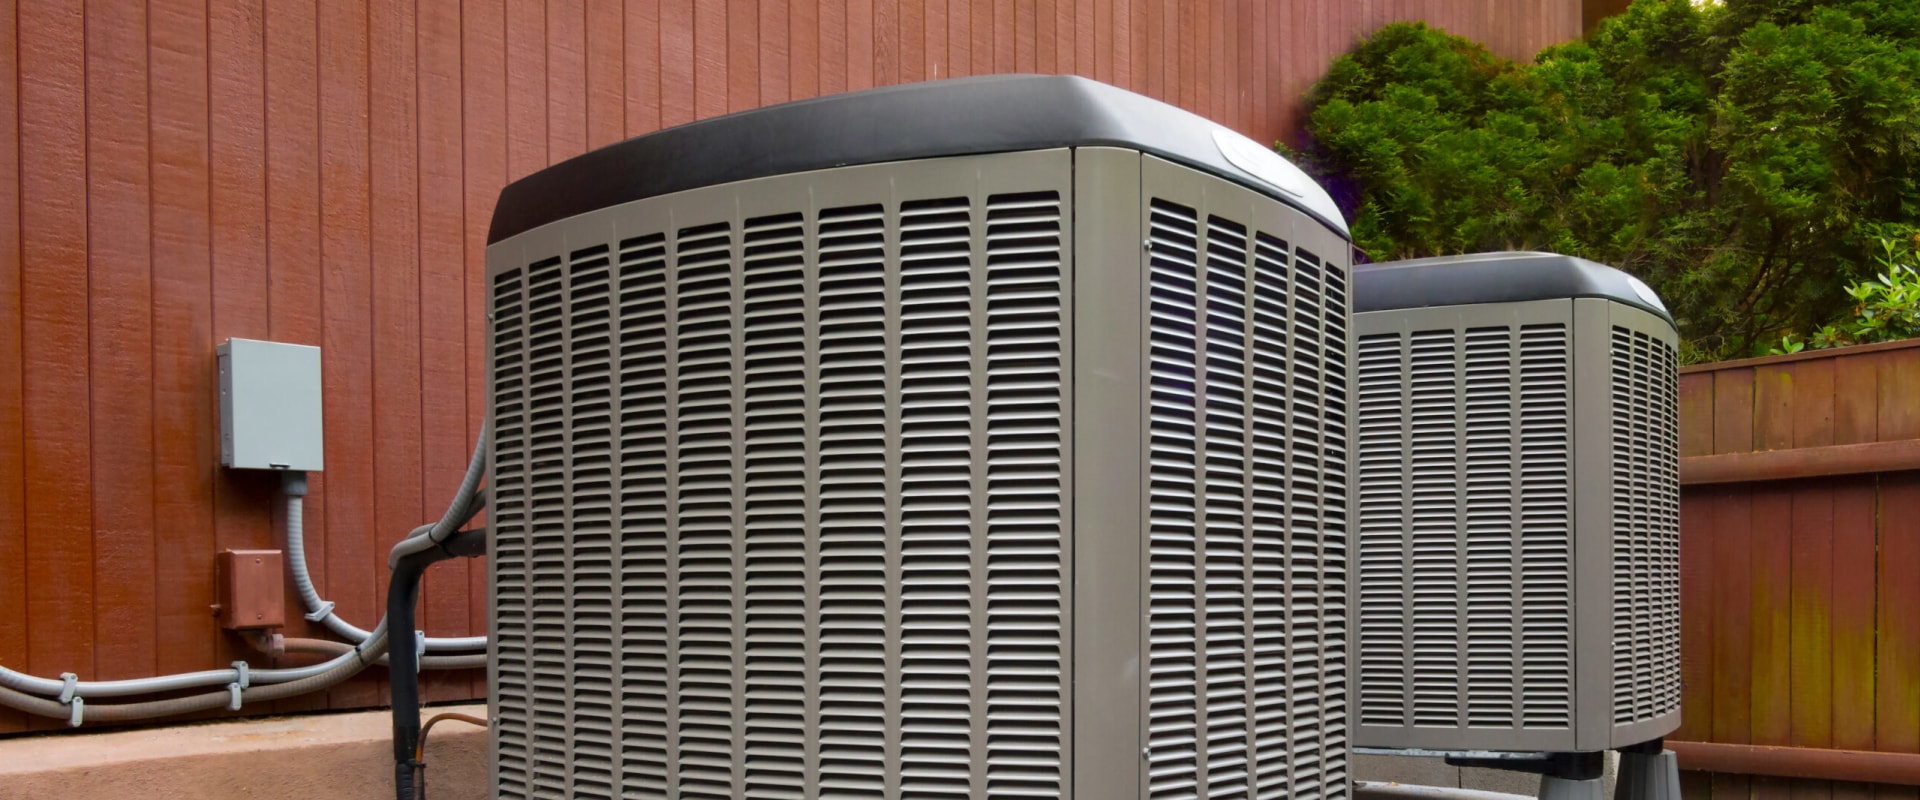 The Ultimate Guide to Choosing the Best and Most Affordable Air Conditioning Brand